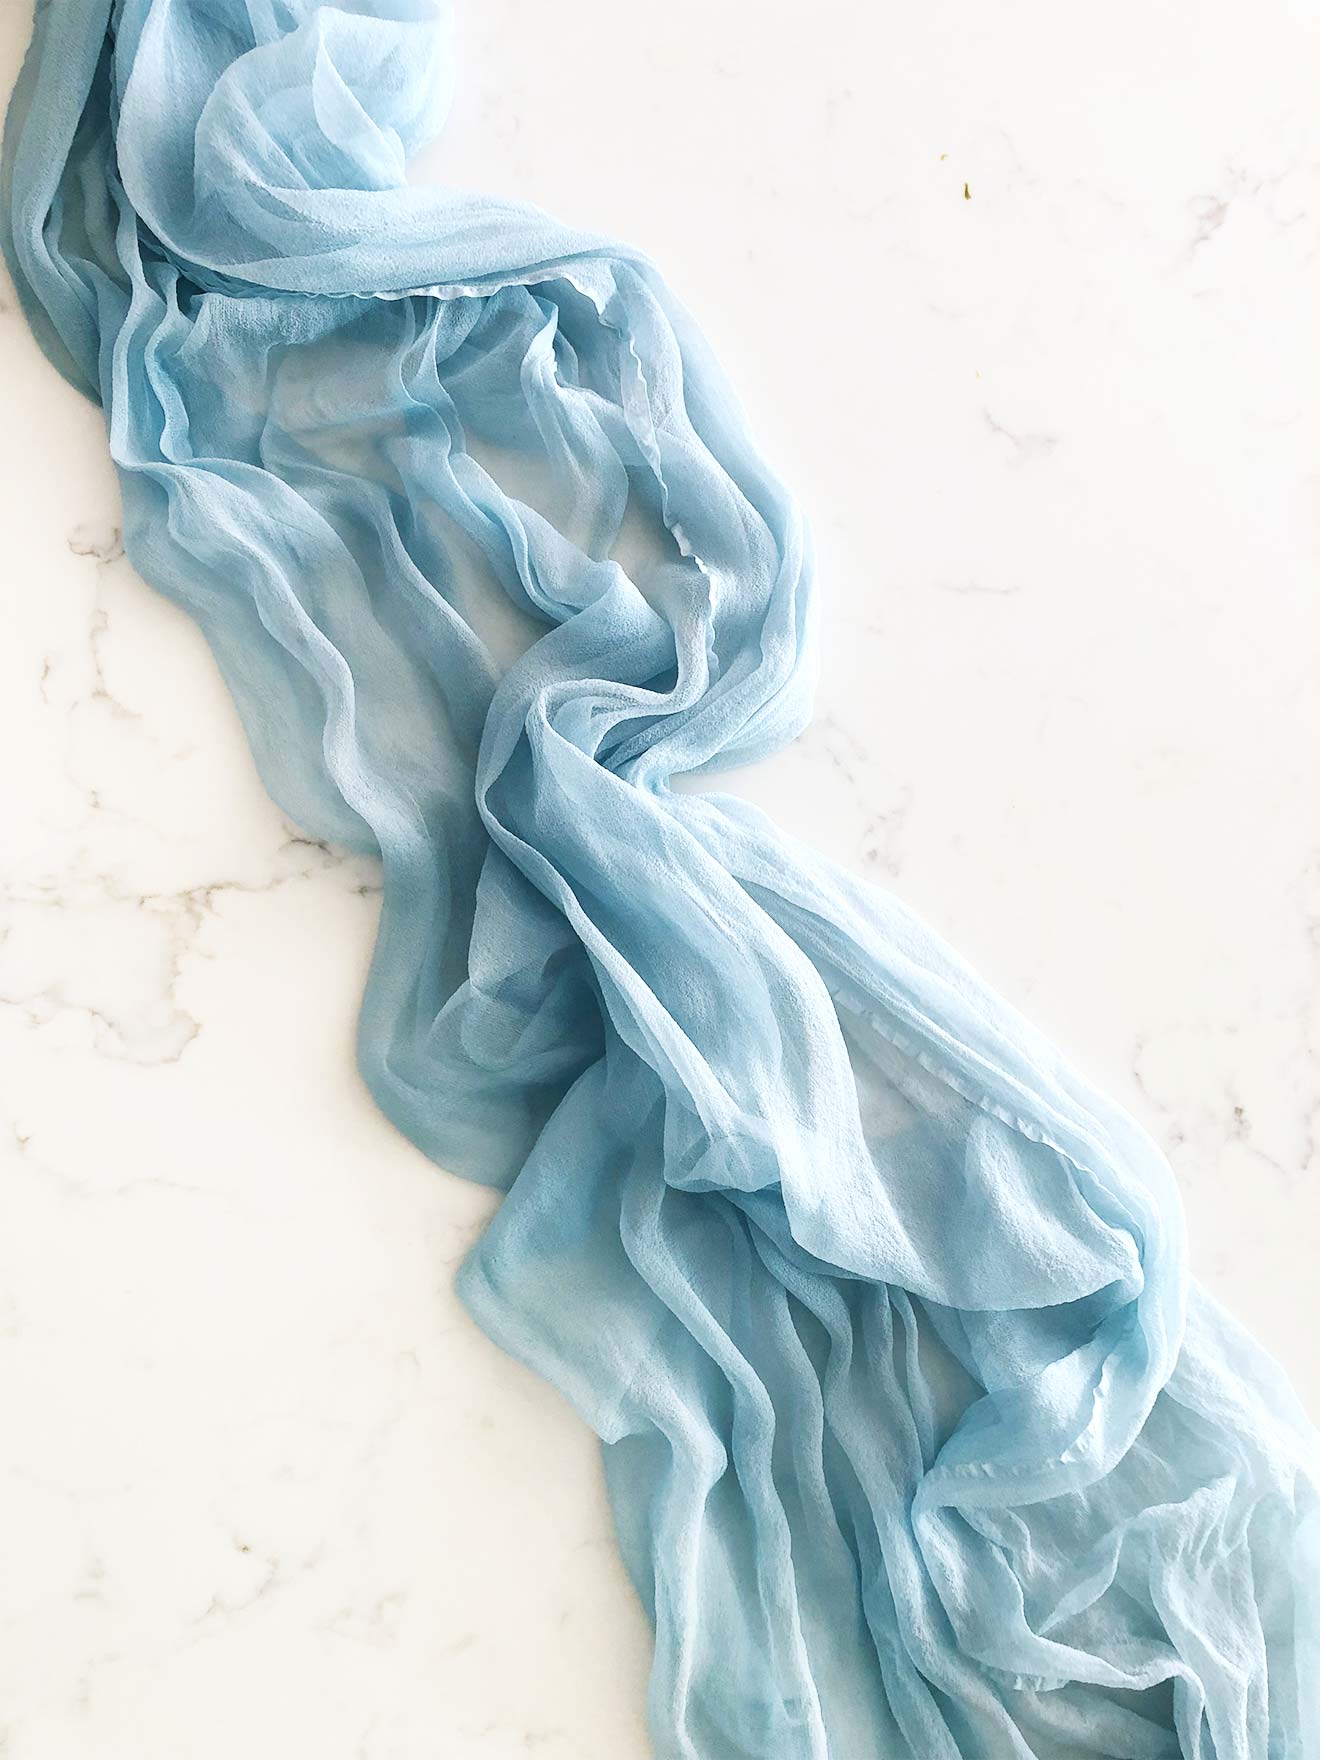 Handcrafted Gauss styling cloth in Glacier blue with frayed edges